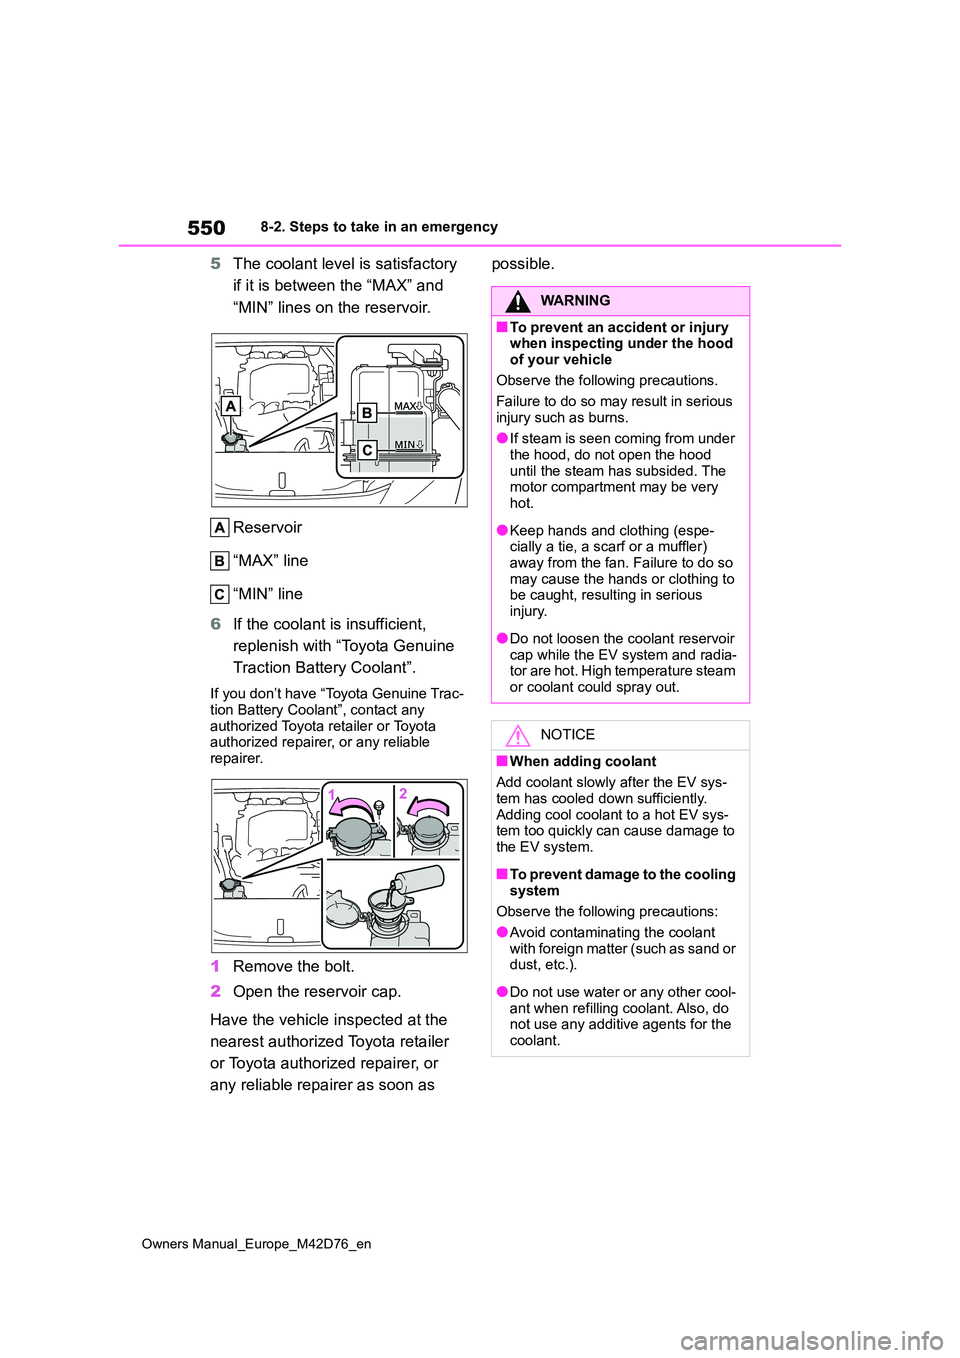 TOYOTA BZ4X 2022  Owners Manual (in English) 550
Owners Manual_Europe_M42D76_en
8-2. Steps to take in an emergency
5The coolant level is satisfactory  
if it is between the “MAX” and  
“MIN” lines on the reservoir. 
Reservoir 
“MAX” 